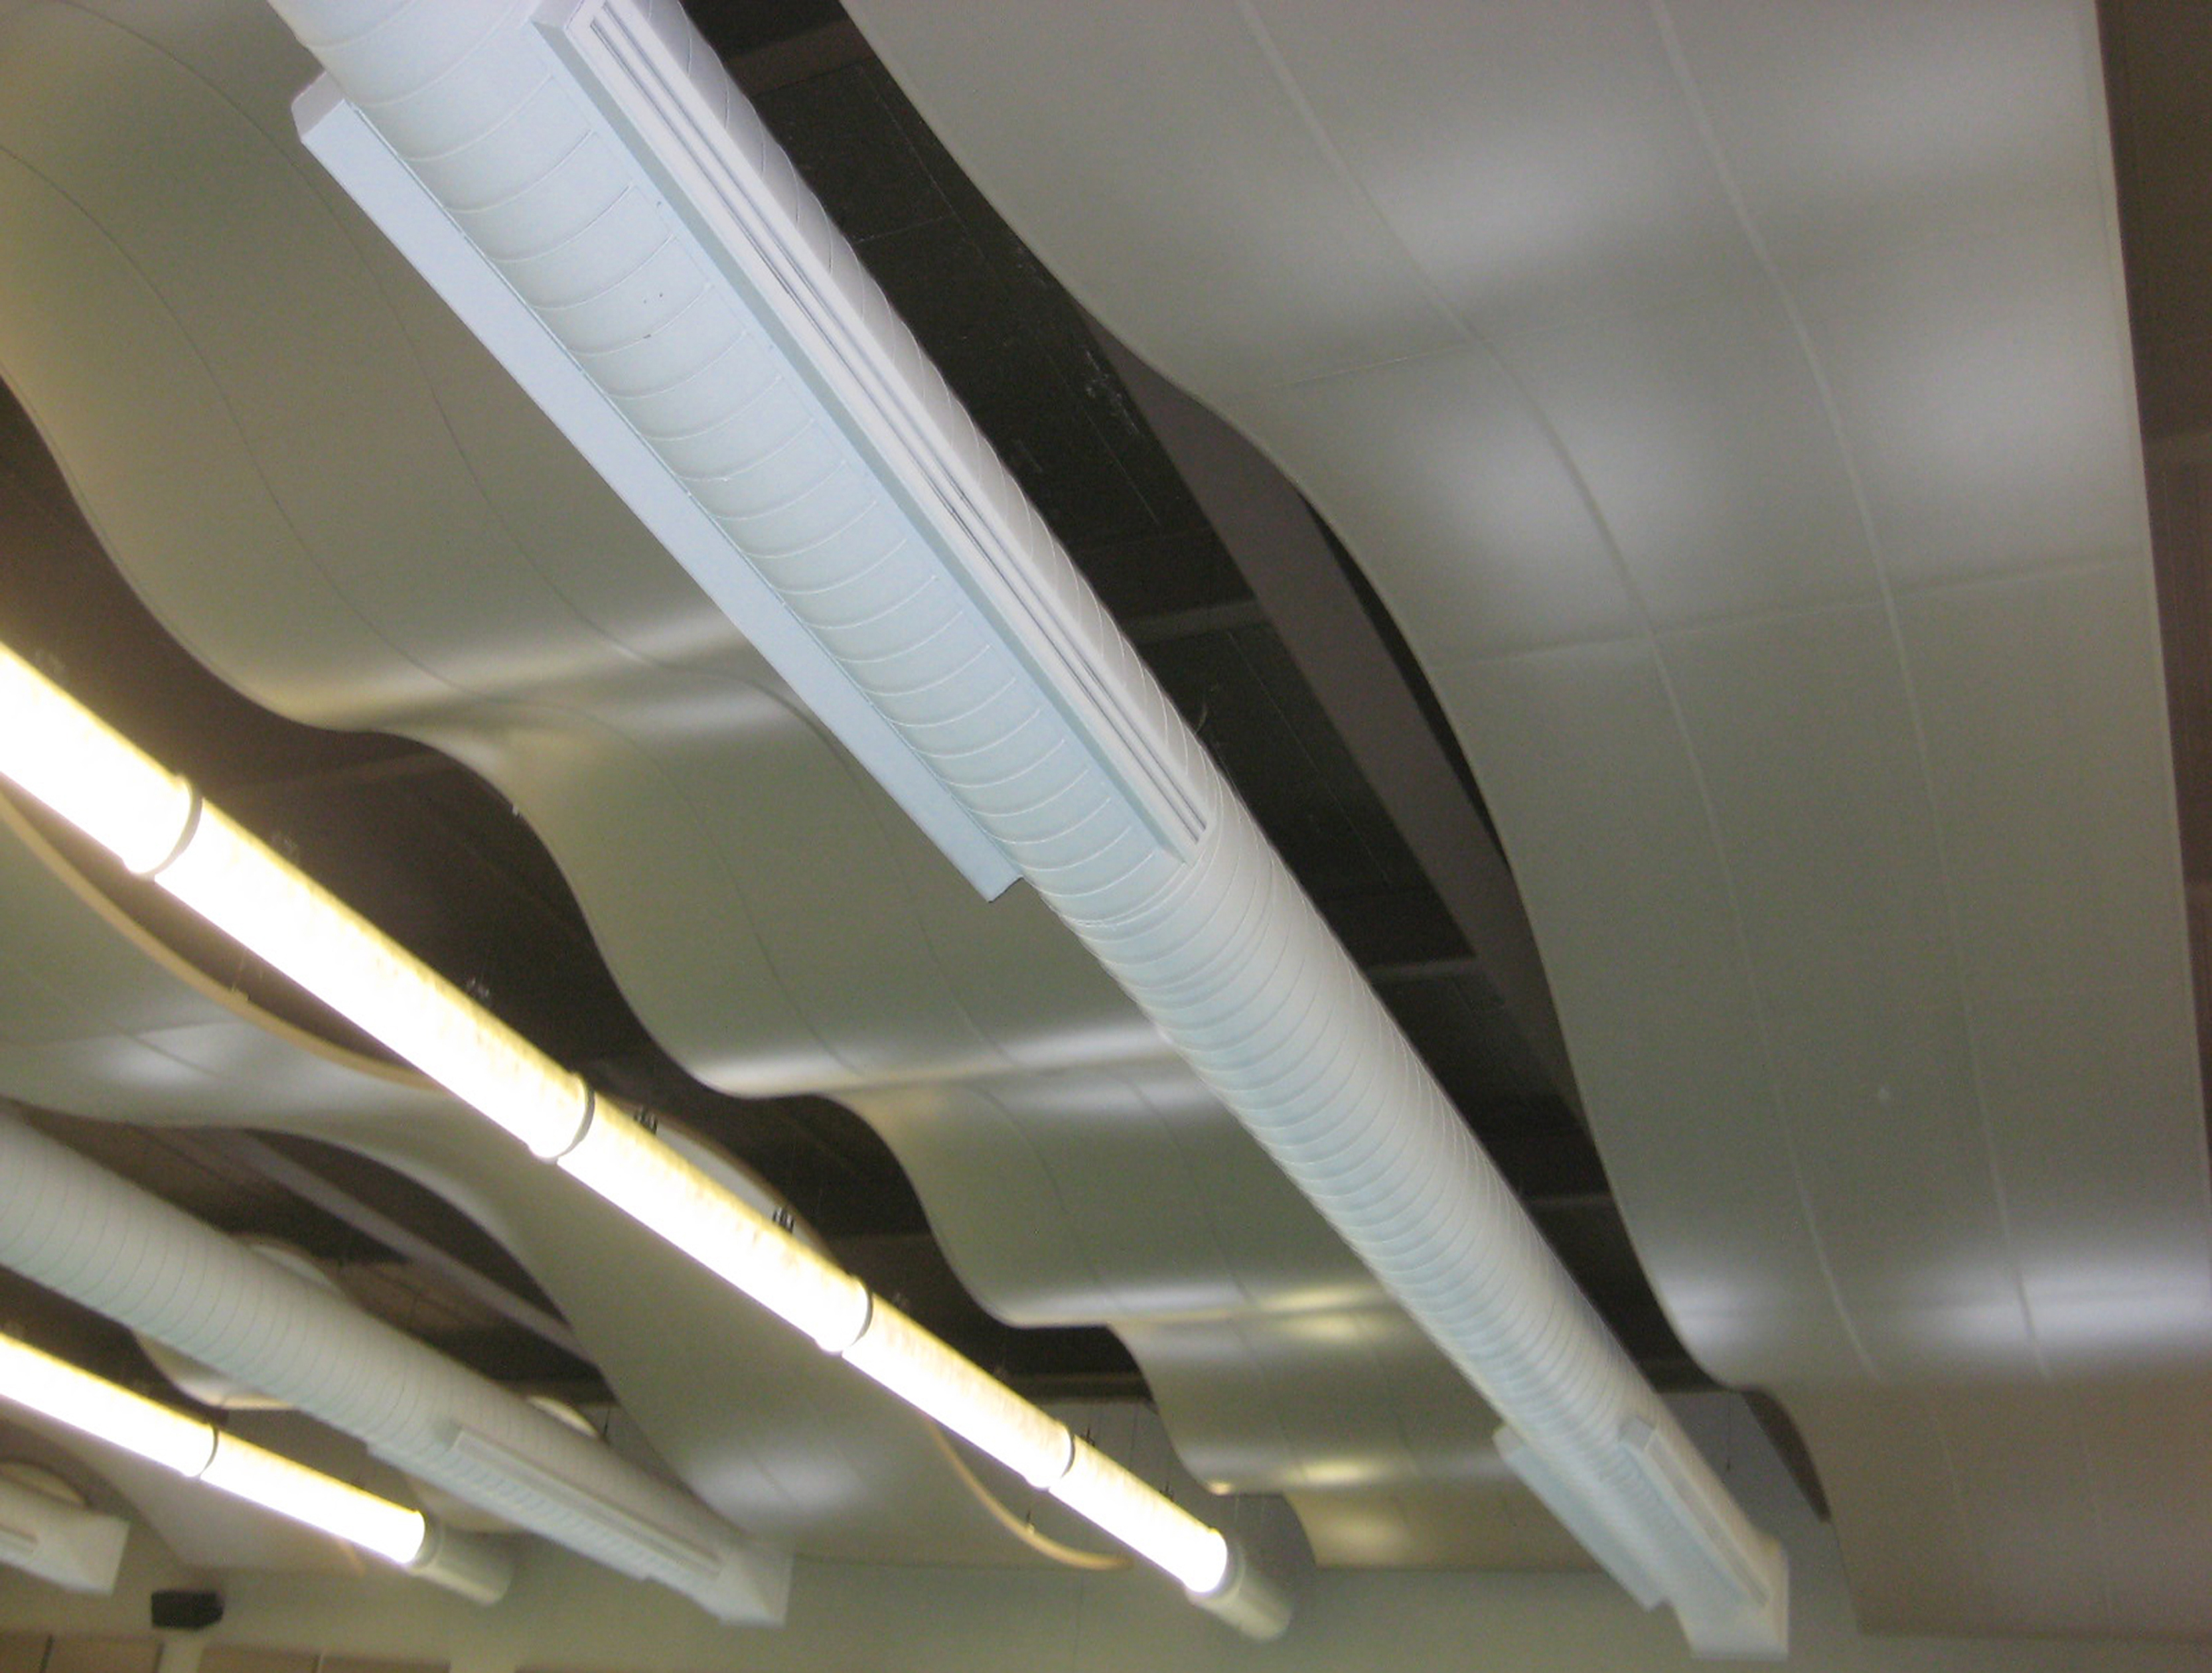 The Wave Curved Metal Ceiling System